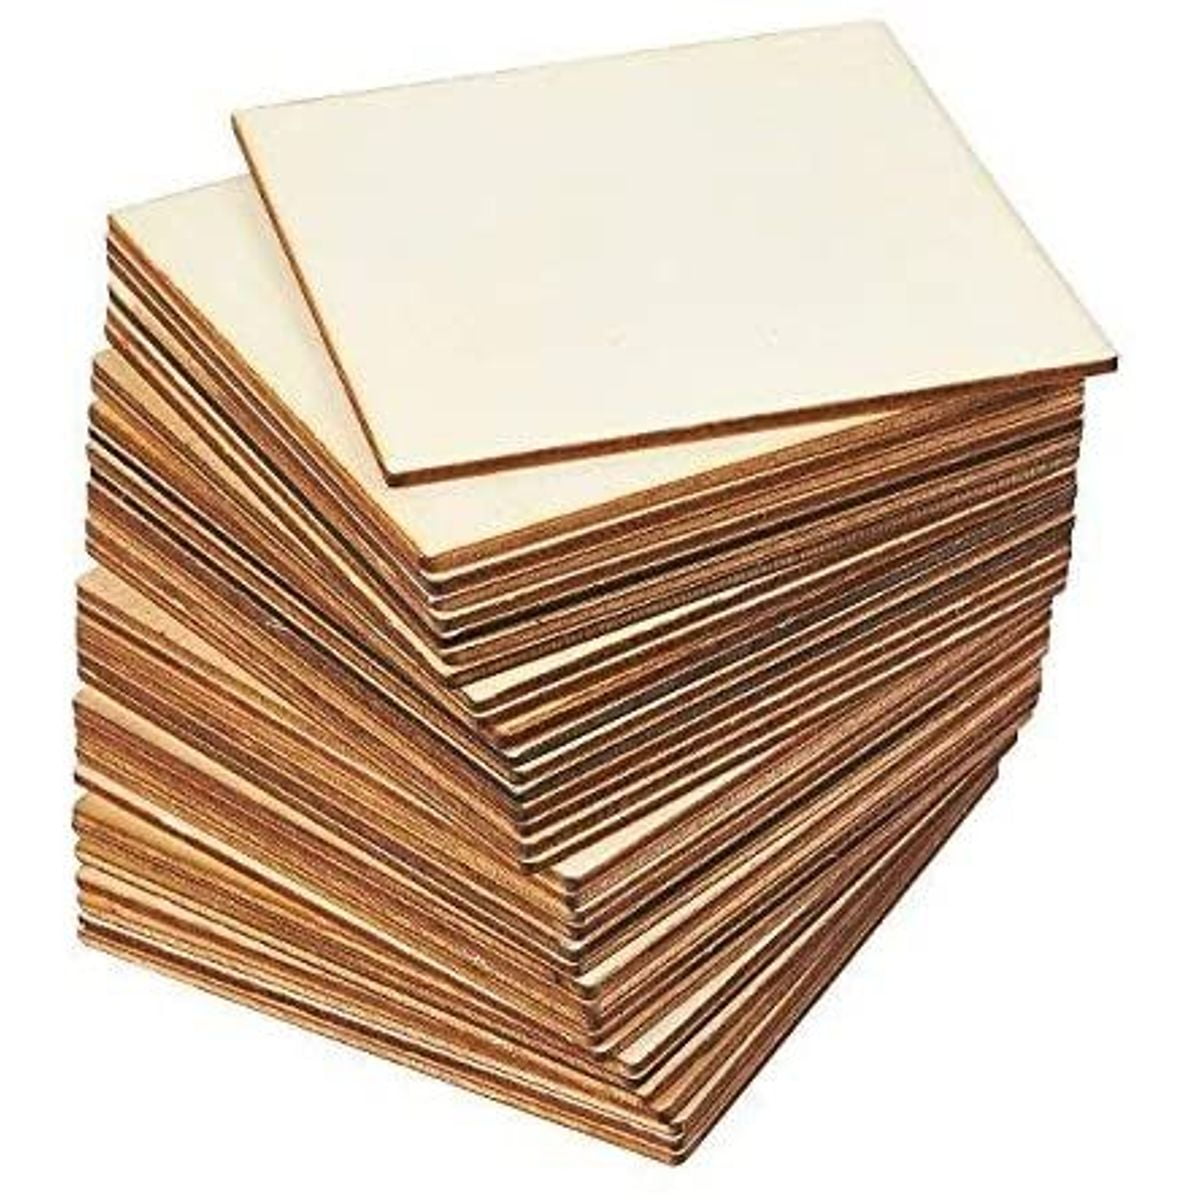 Wooden Blank Laser Cut mdf Craft Shapes Best Teaching Assistant Apples x6